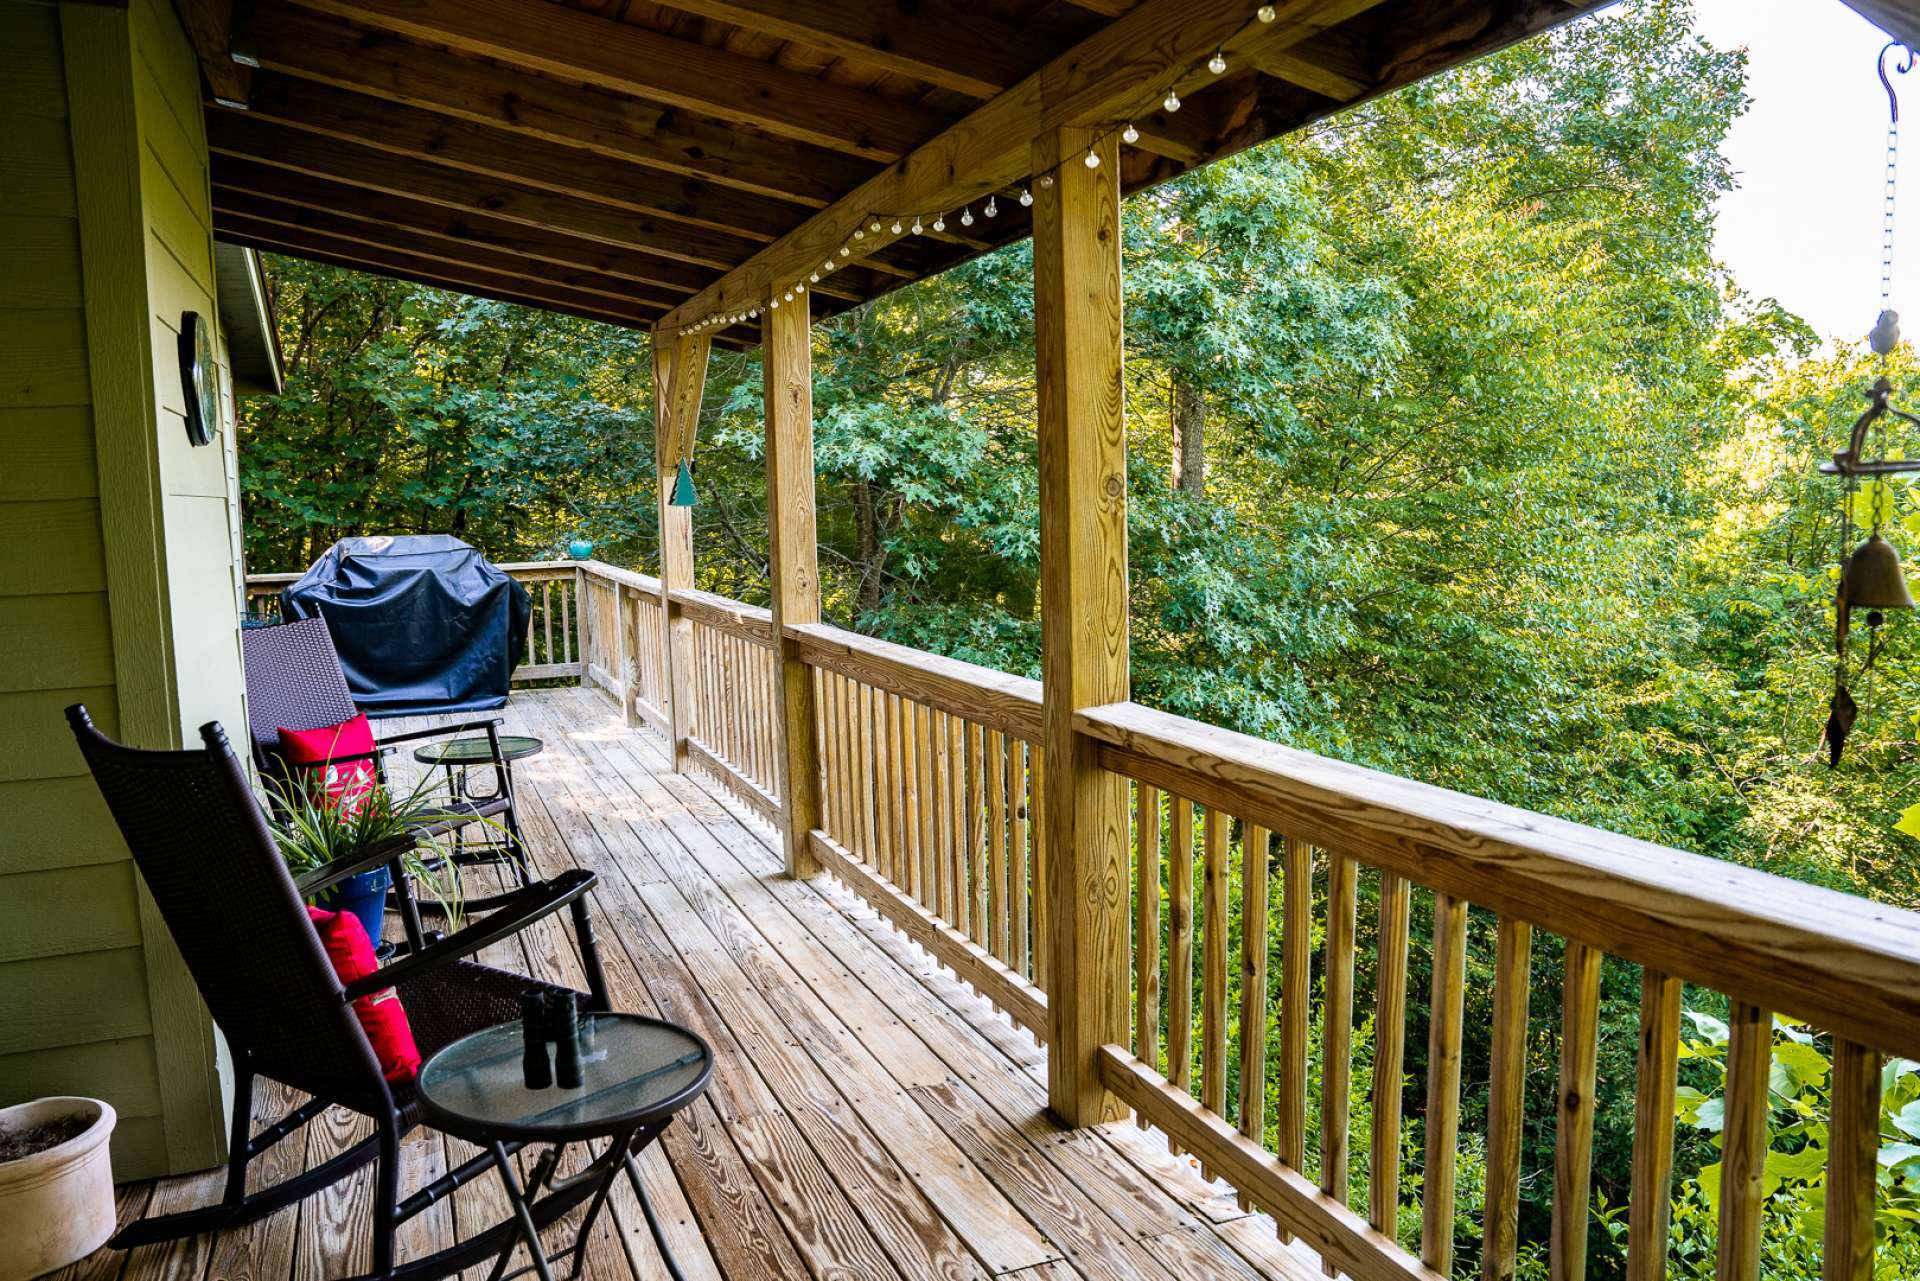 During the warmer months, you can enjoy alfresco dining on the partially covered deck.